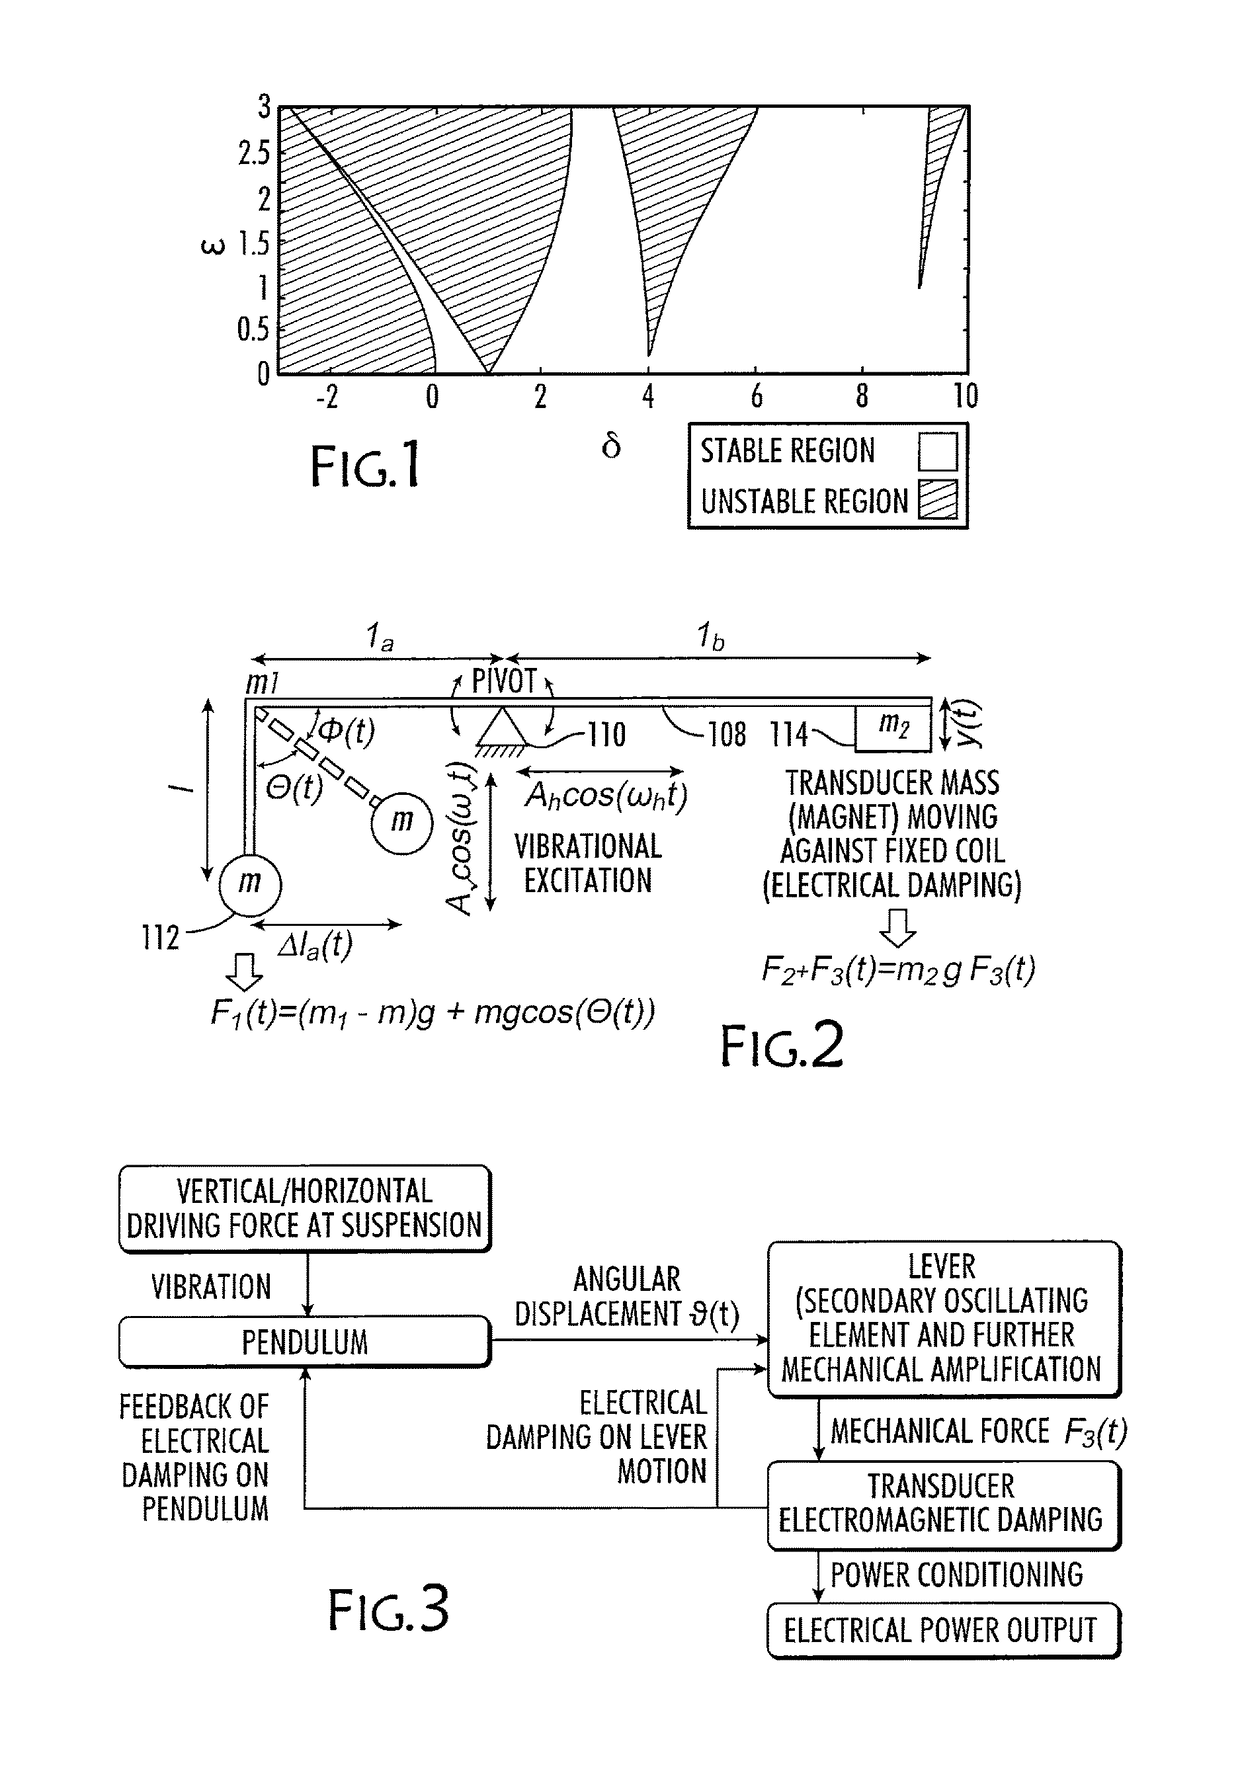 Energy-harvesting apparatus with plural mechanical amplifiers